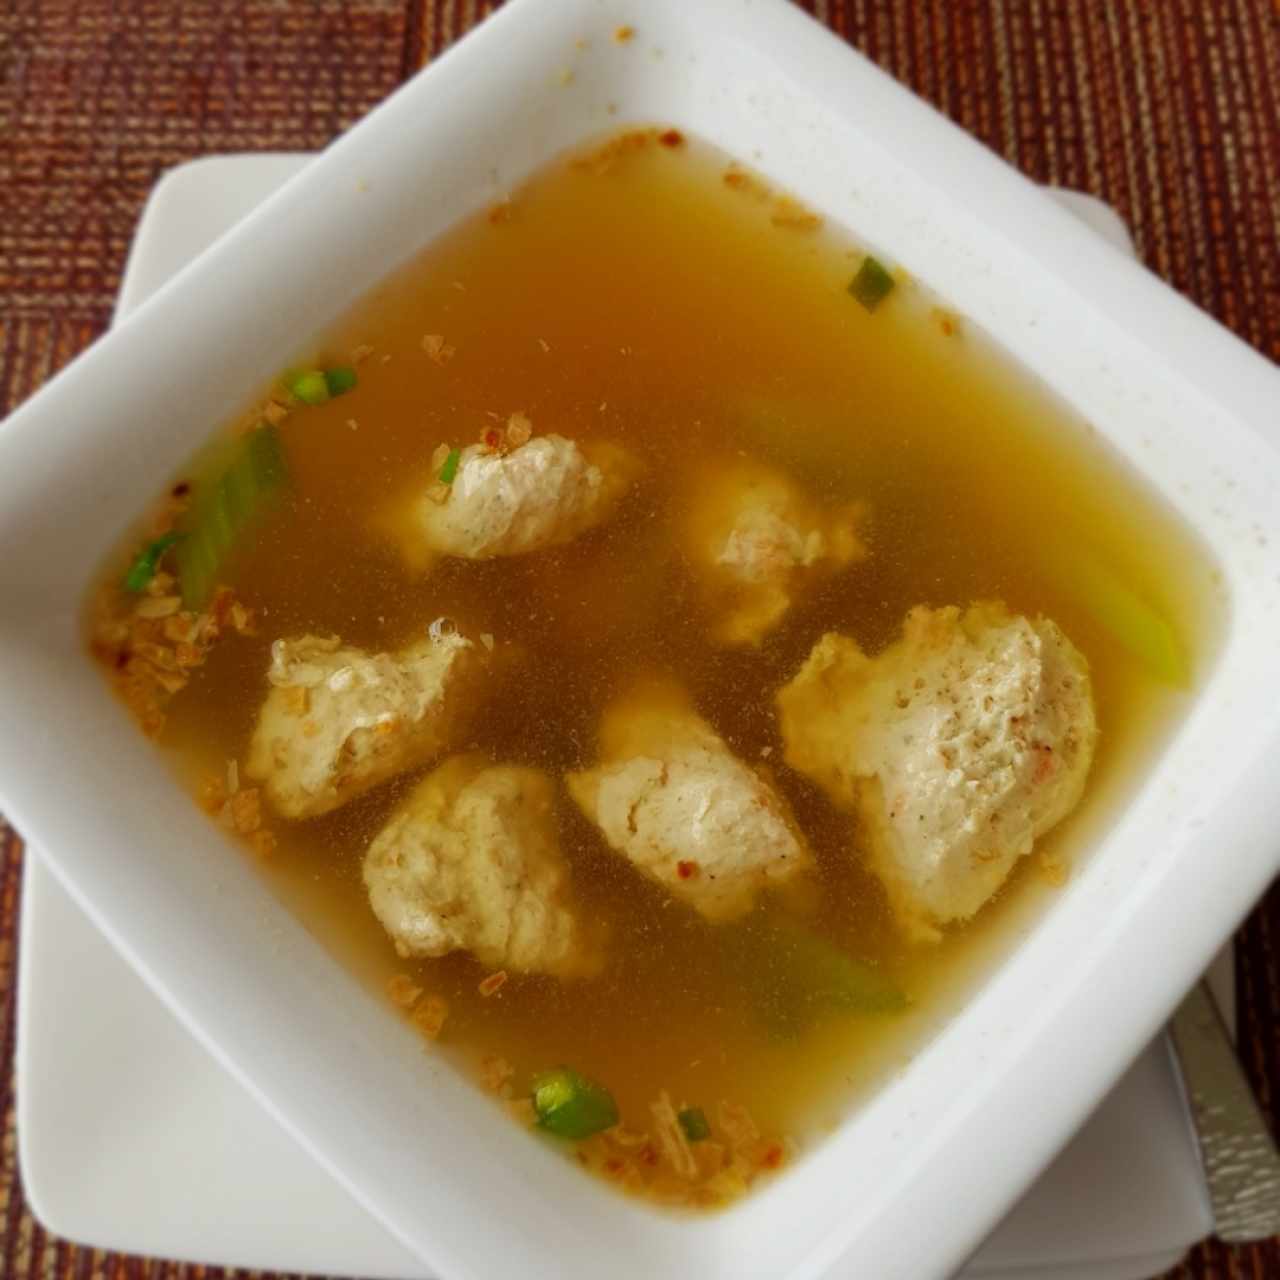 SOUPS - CHICKEN GINGER SOUP